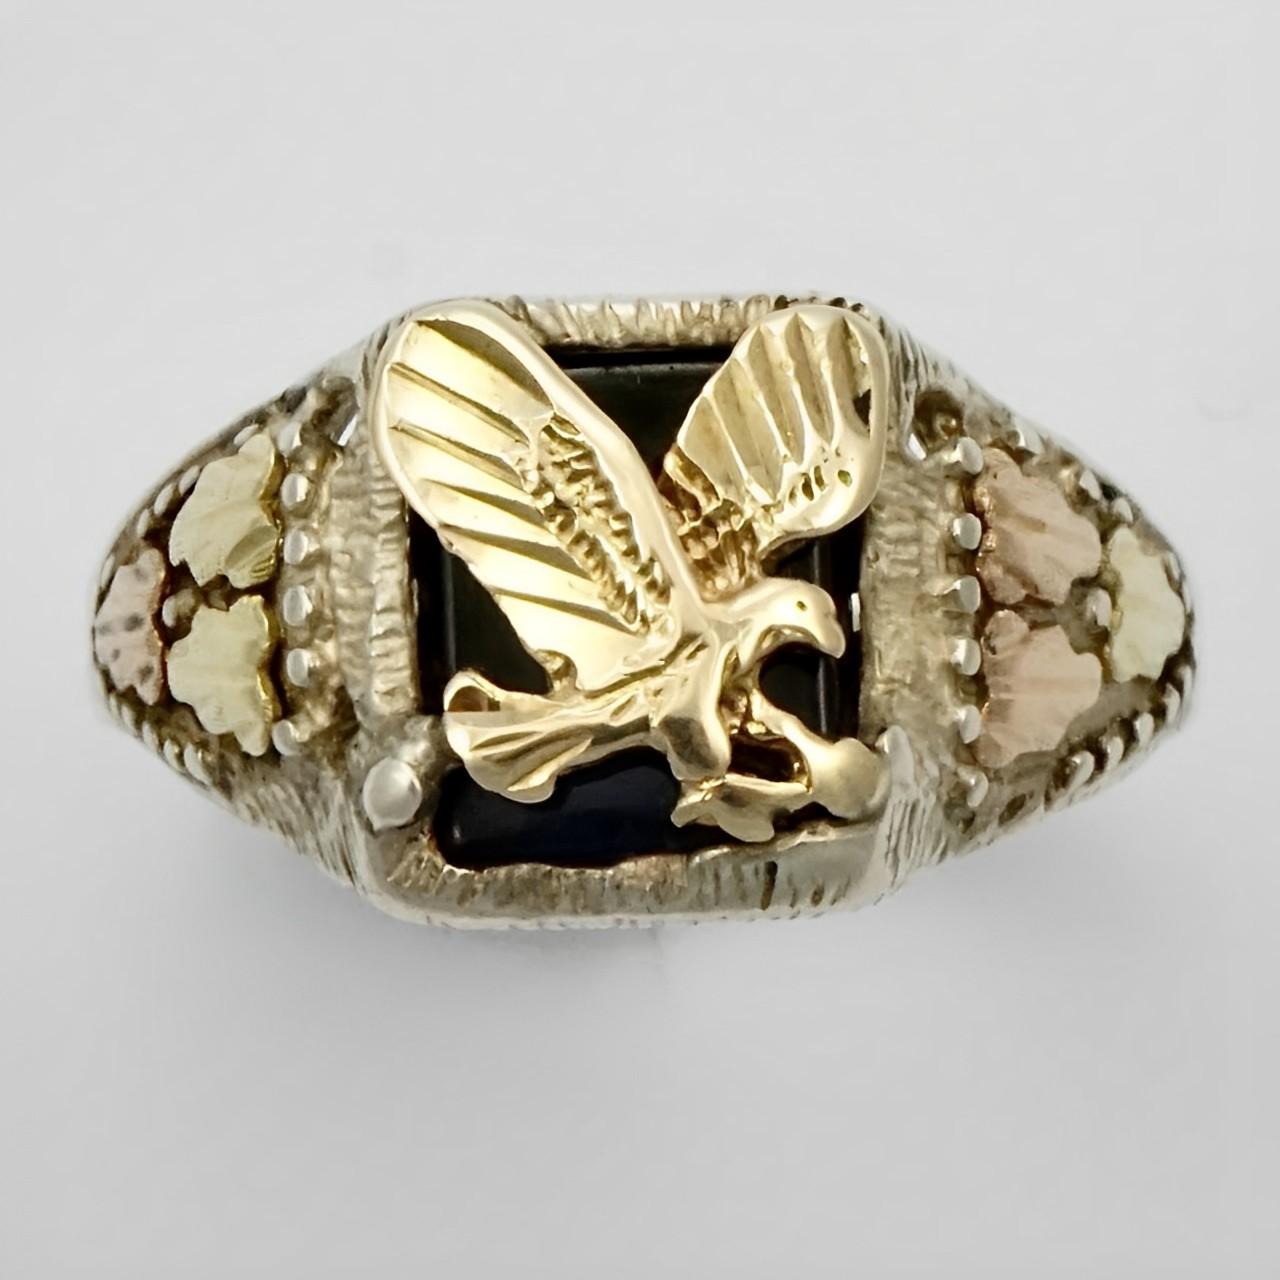 Fabulous sterling silver ring with a yellow gold eagle and rose gold and yellow gold leaf design shoulders. The eagle is on a black stone background, which is probably onyx. Ring size UK Q / US 8, inside diameter 1.9 cm / .74 inch. The front